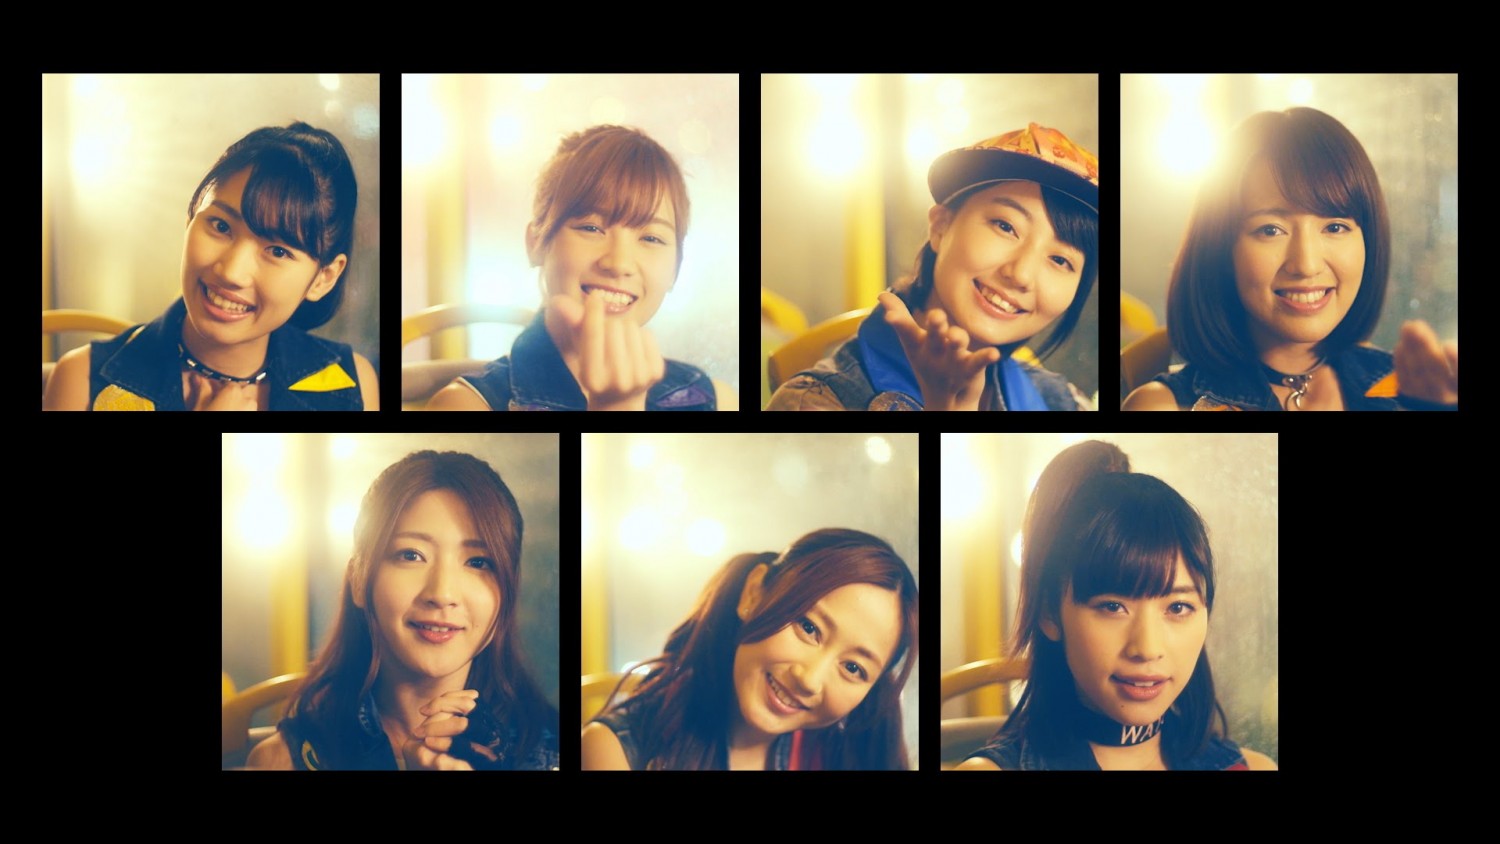 UPUPGIRLS (KARI) Brighten Up a Rainy Evening With the MV for “Seven☆Peace”!